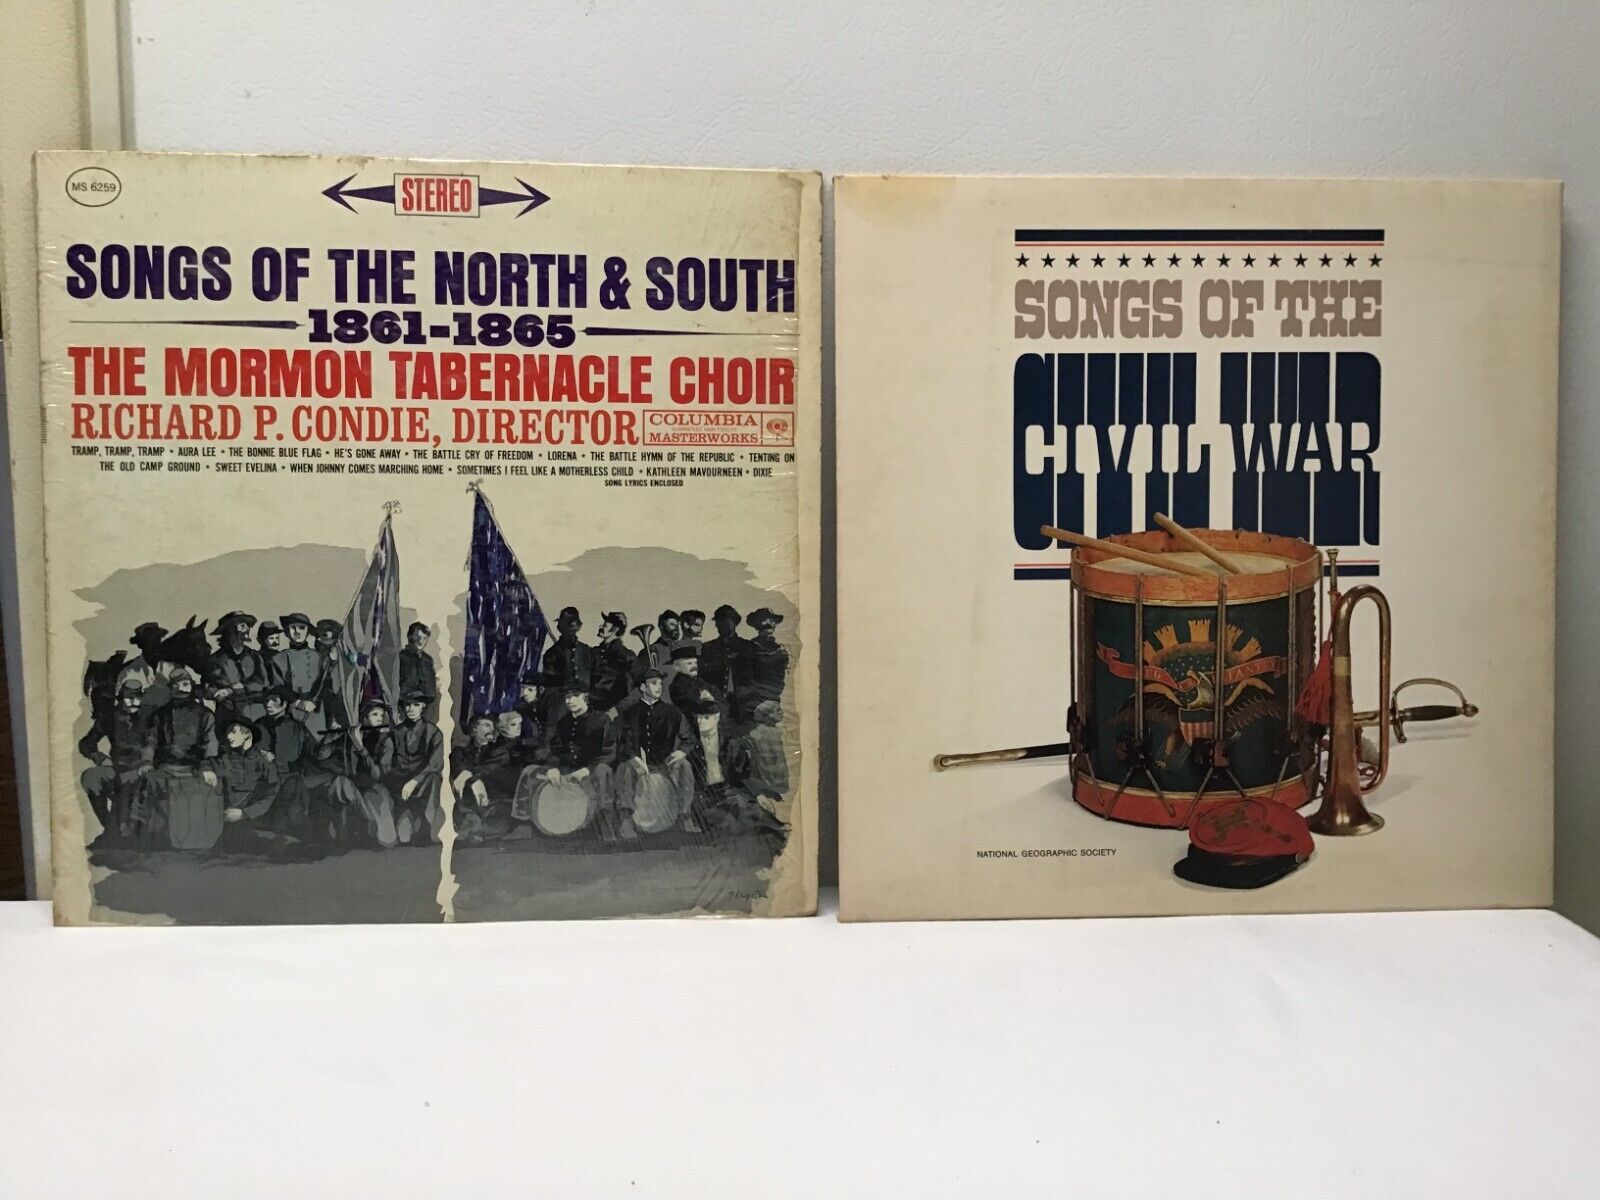 2 Vintage Vinyl LPs-Songs of the North & South 1861-1865/Songs of the Civil War